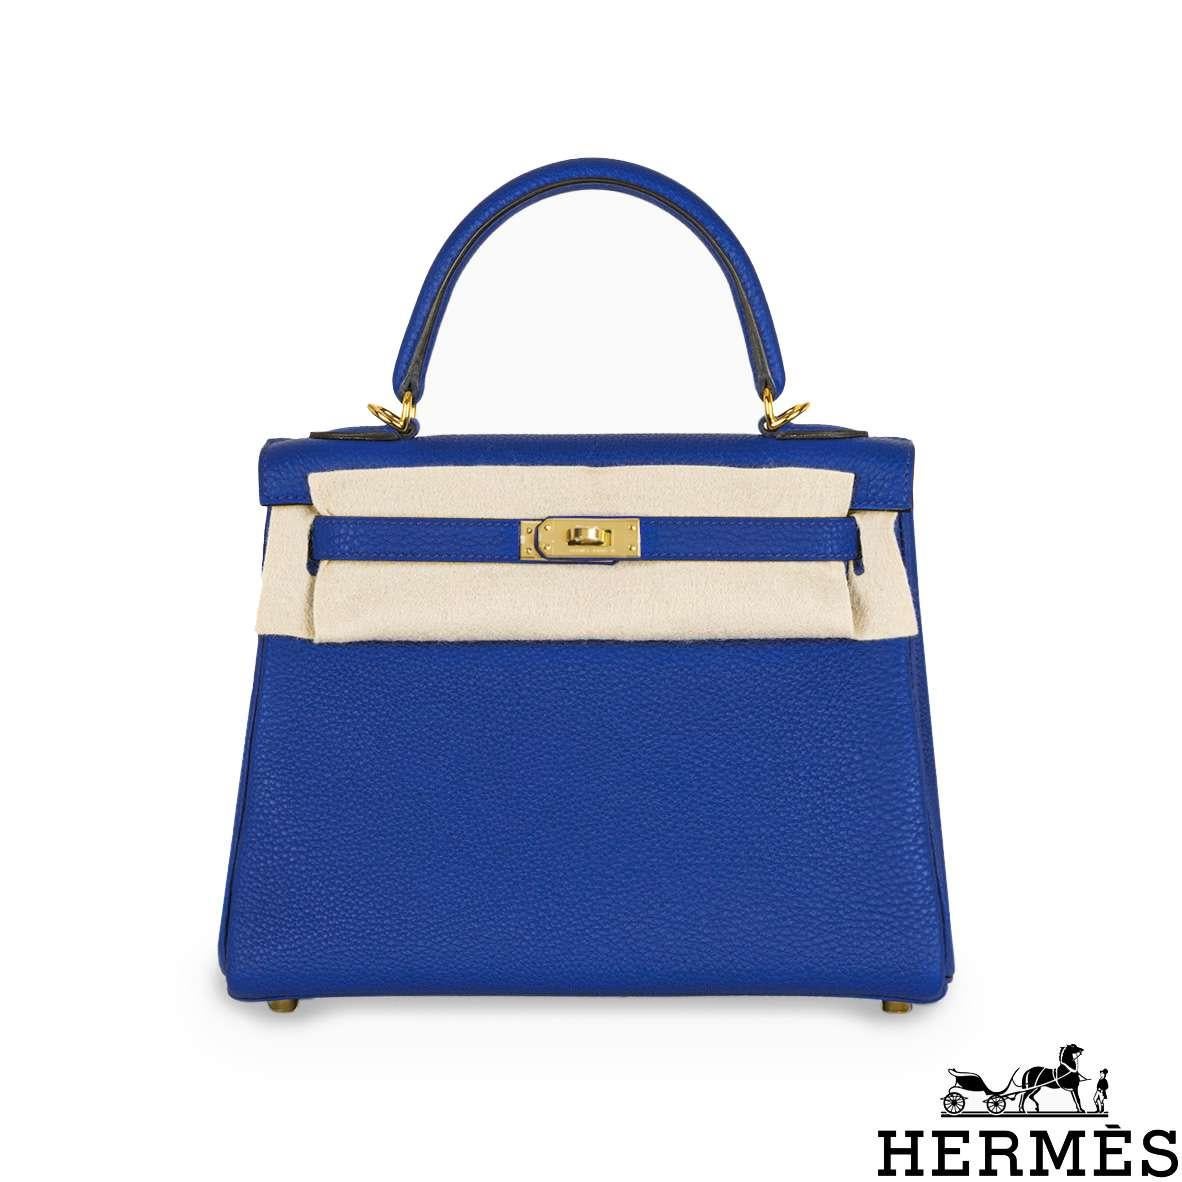 A beautiful Hermès 25cm Kelly bag. The exterior of this Kelly features a Retourne style in Bleu Royal Veau Togo leather. The Bleu Royal Togo leather is complemented with gold-tone hardware and tonal stitchings. It features a front toggle closure